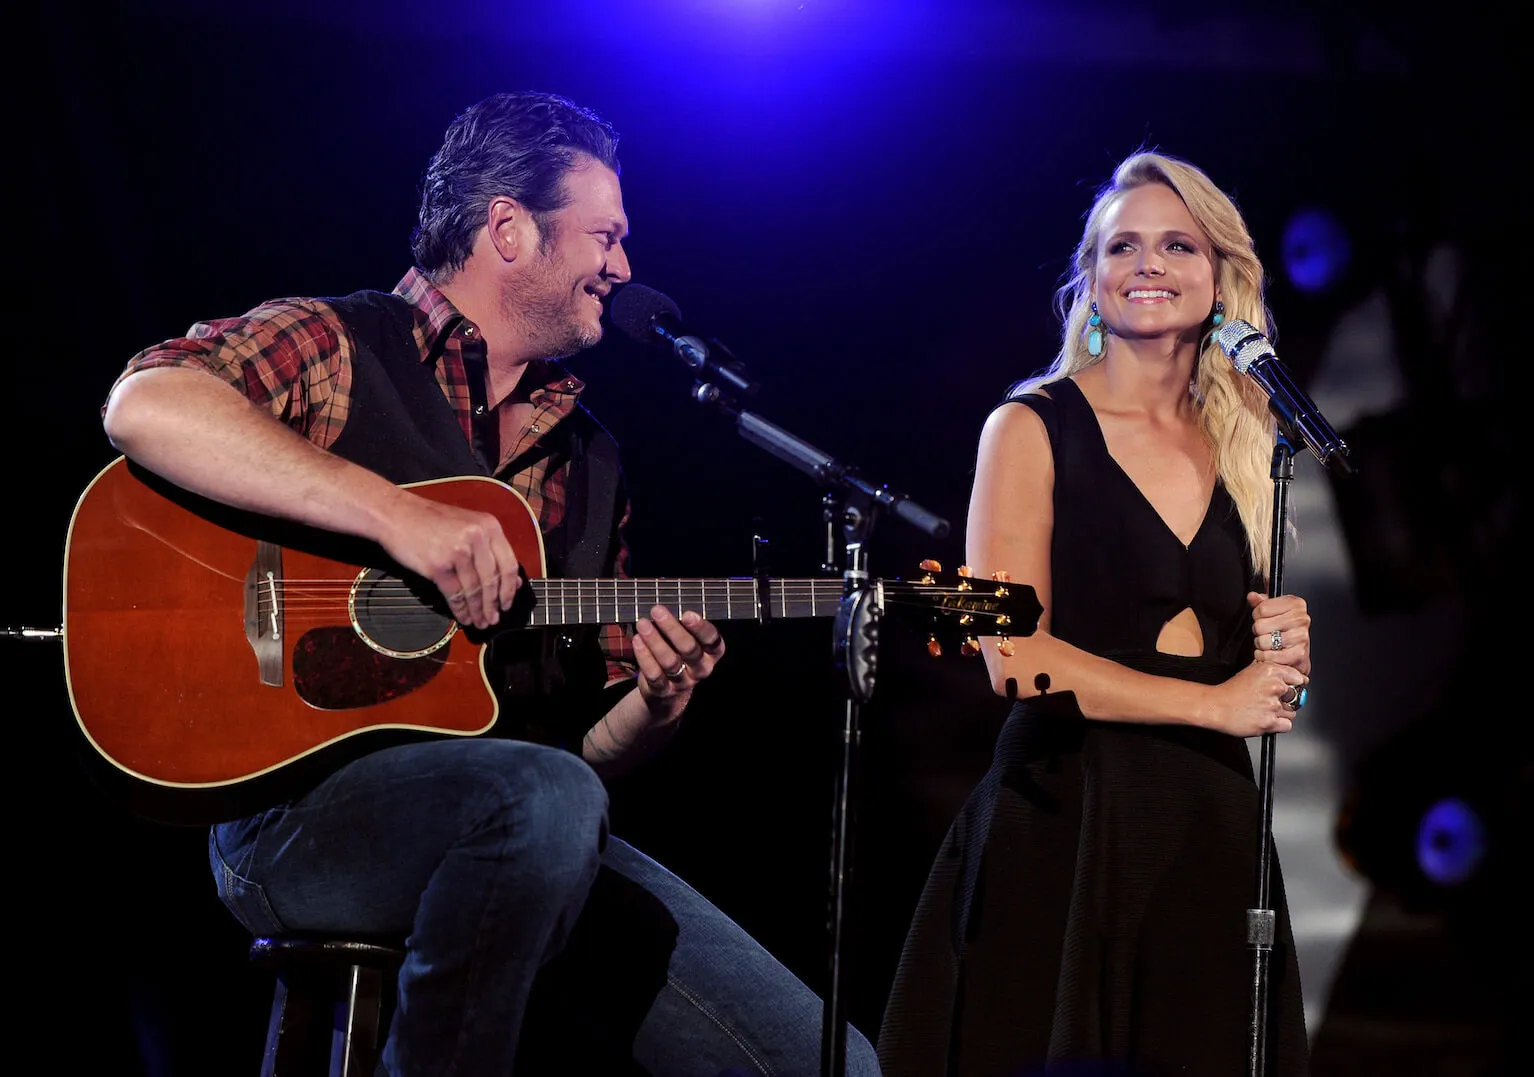 Blake Shelton sitting and holding his guitar on stage next to Miranda Lambert, who's standing in front of a microphone during ACM Presents: An All-Star Salute To The Troops at the MGM Grand Garden Arena in 2014